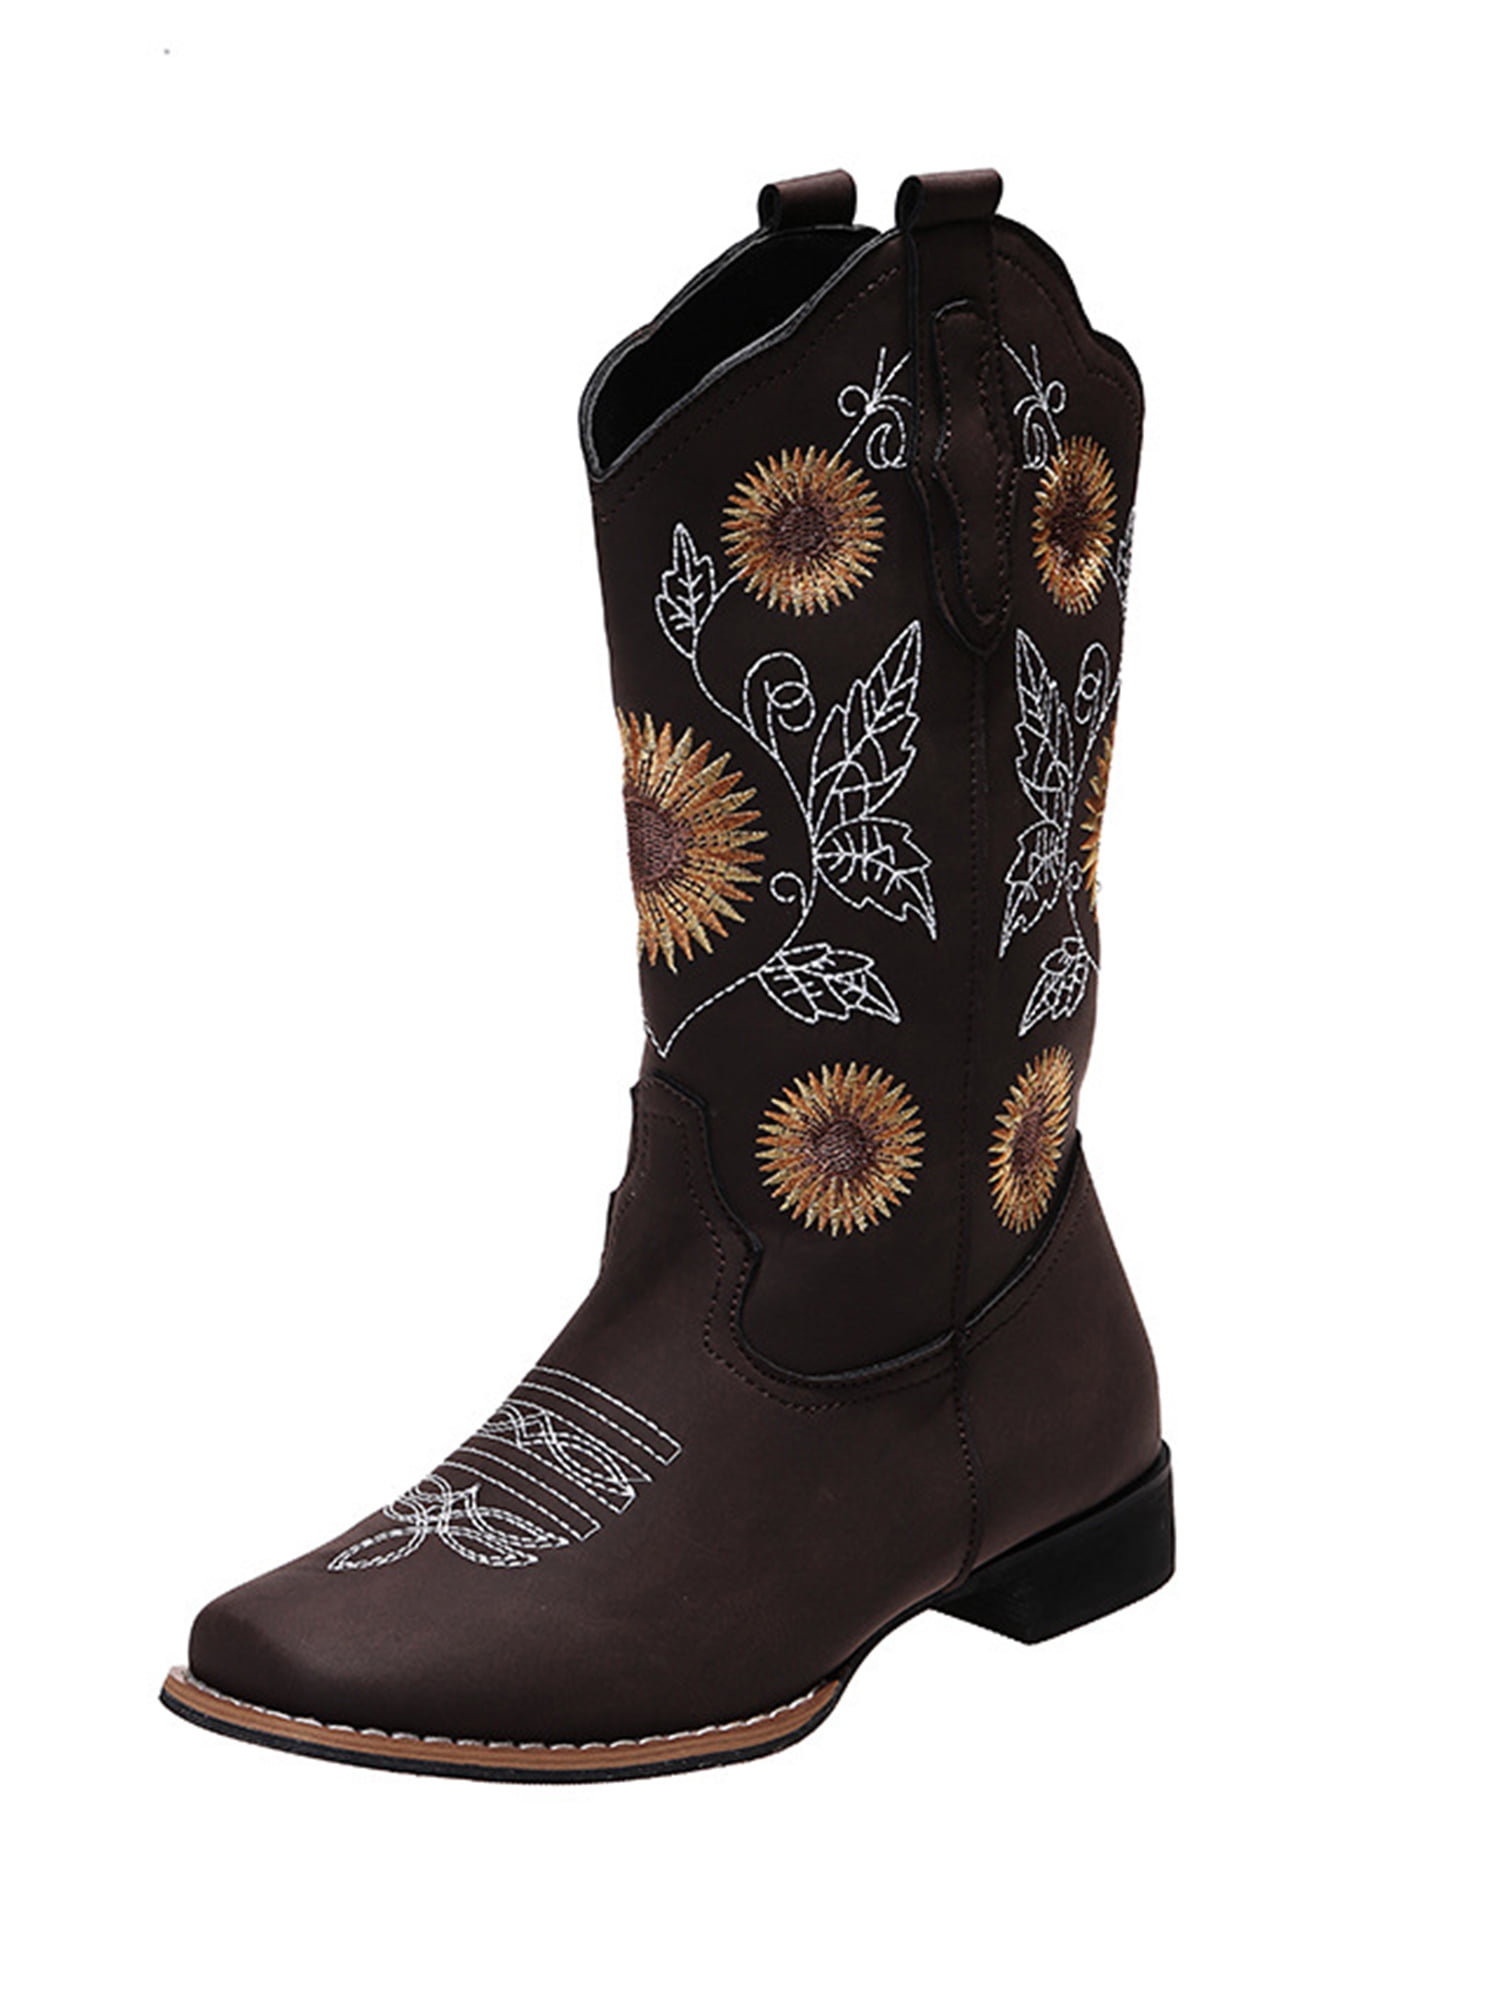 Western Work Combat Cowboy Boots For Women Men Mid Calf Boots Chunky Heel Floral Embroidered Leather Pull-on Cowgirl Unisex 